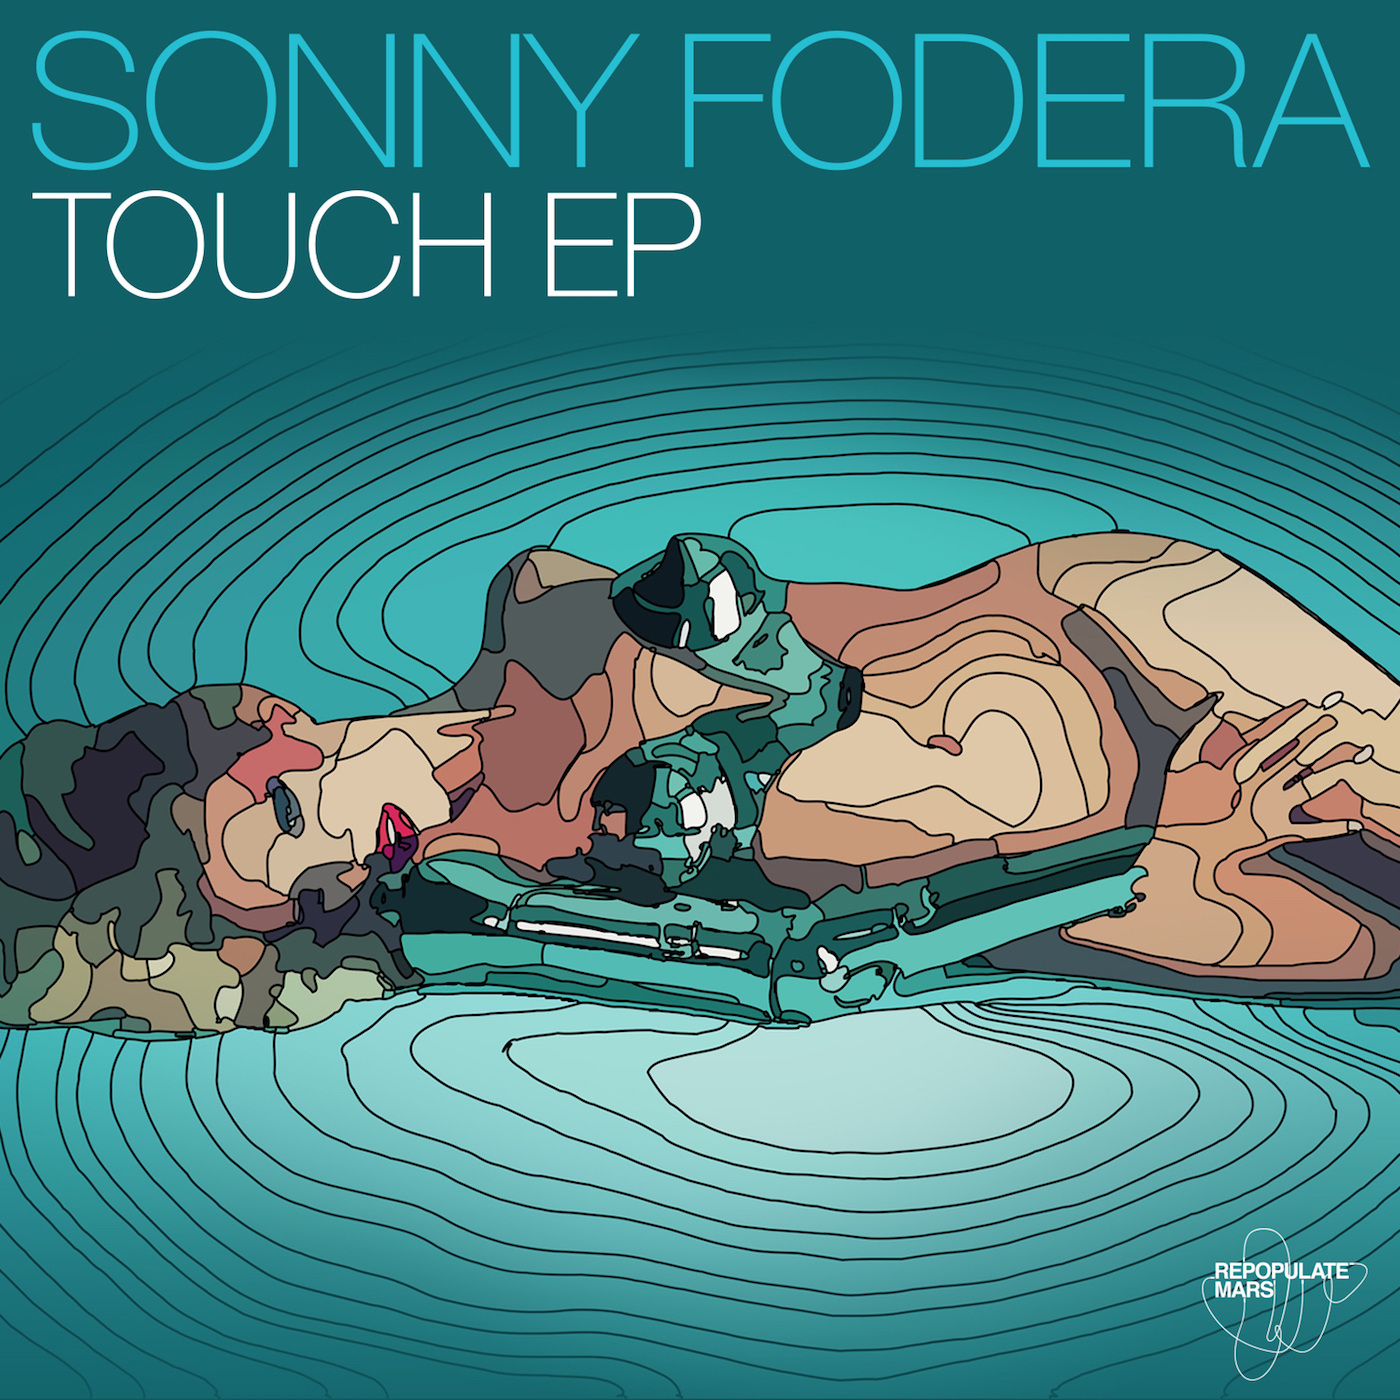 Sonny Fodera - Touch EP / Repopulate Mars